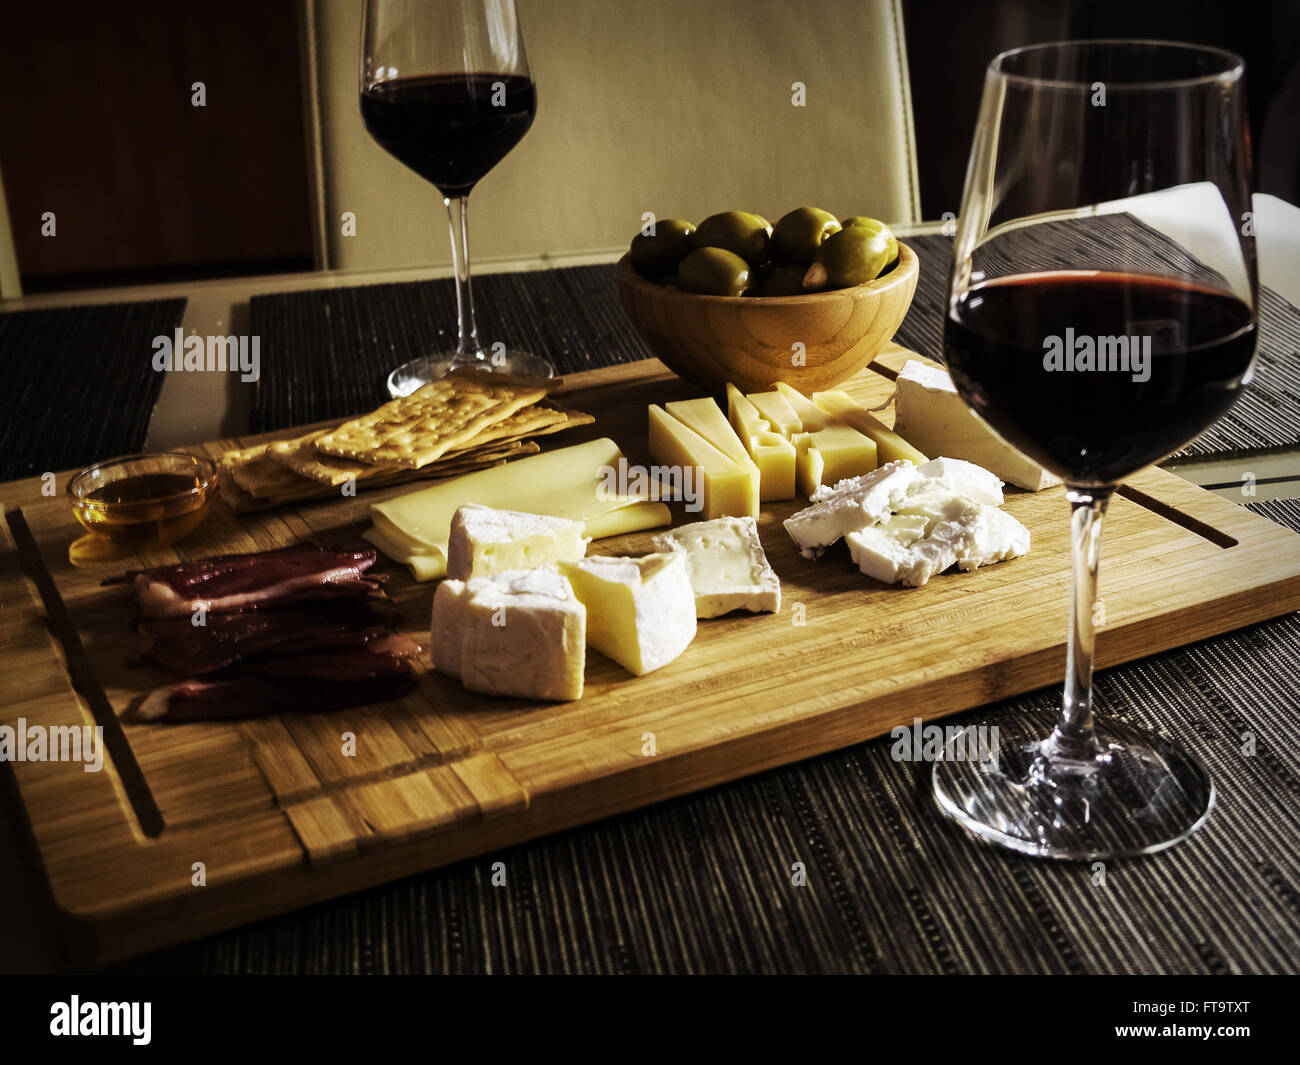 Camembert, Gouda And Brie Cheese Platter With Wine Glasses Stock Photo